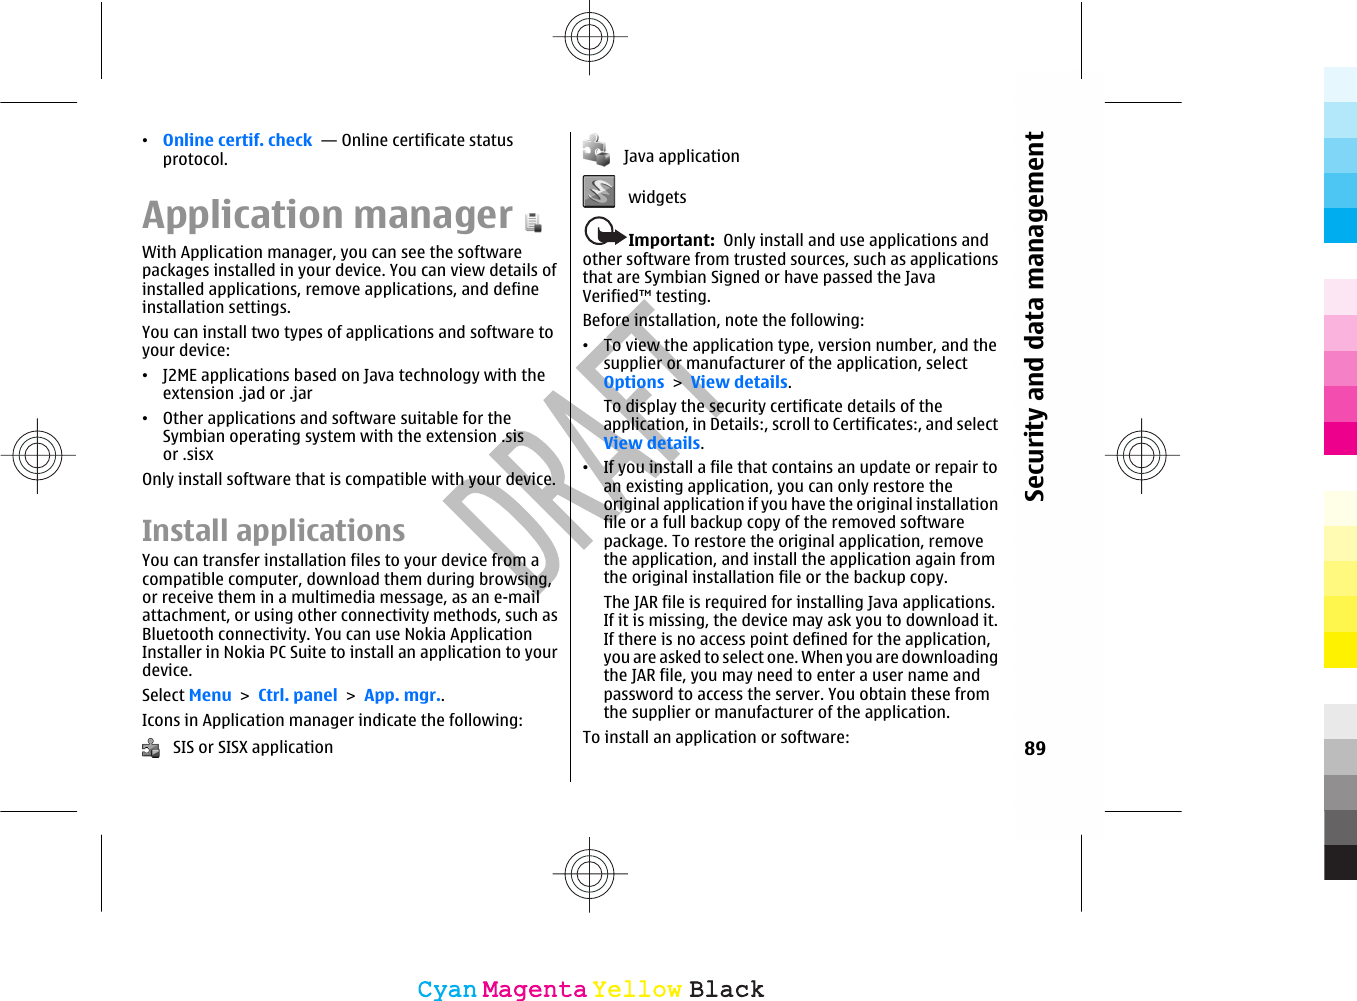 •Online certif. check  — Online certificate statusprotocol.Application managerWith Application manager, you can see the softwarepackages installed in your device. You can view details ofinstalled applications, remove applications, and defineinstallation settings.You can install two types of applications and software toyour device:•J2ME applications based on Java technology with theextension .jad or .jar•Other applications and software suitable for theSymbian operating system with the extension .sisor .sisxOnly install software that is compatible with your device.Install applicationsYou can transfer installation files to your device from acompatible computer, download them during browsing,or receive them in a multimedia message, as an e-mailattachment, or using other connectivity methods, such asBluetooth connectivity. You can use Nokia ApplicationInstaller in Nokia PC Suite to install an application to yourdevice.Select Menu &gt; Ctrl. panel &gt; App. mgr..Icons in Application manager indicate the following:   SIS or SISX application   Java application   widgetsImportant:  Only install and use applications andother software from trusted sources, such as applicationsthat are Symbian Signed or have passed the JavaVerified™ testing.Before installation, note the following:•To view the application type, version number, and thesupplier or manufacturer of the application, selectOptions &gt; View details.To display the security certificate details of theapplication, in Details:, scroll to Certificates:, and selectView details.•If you install a file that contains an update or repair toan existing application, you can only restore theoriginal application if you have the original installationfile or a full backup copy of the removed softwarepackage. To restore the original application, removethe application, and install the application again fromthe original installation file or the backup copy.The JAR file is required for installing Java applications.If it is missing, the device may ask you to download it.If there is no access point defined for the application,you are asked to select one. When you are downloadingthe JAR file, you may need to enter a user name andpassword to access the server. You obtain these fromthe supplier or manufacturer of the application.To install an application or software: 89Security and data managementCyanCyanMagentaMagentaYellowYellowBlackBlack